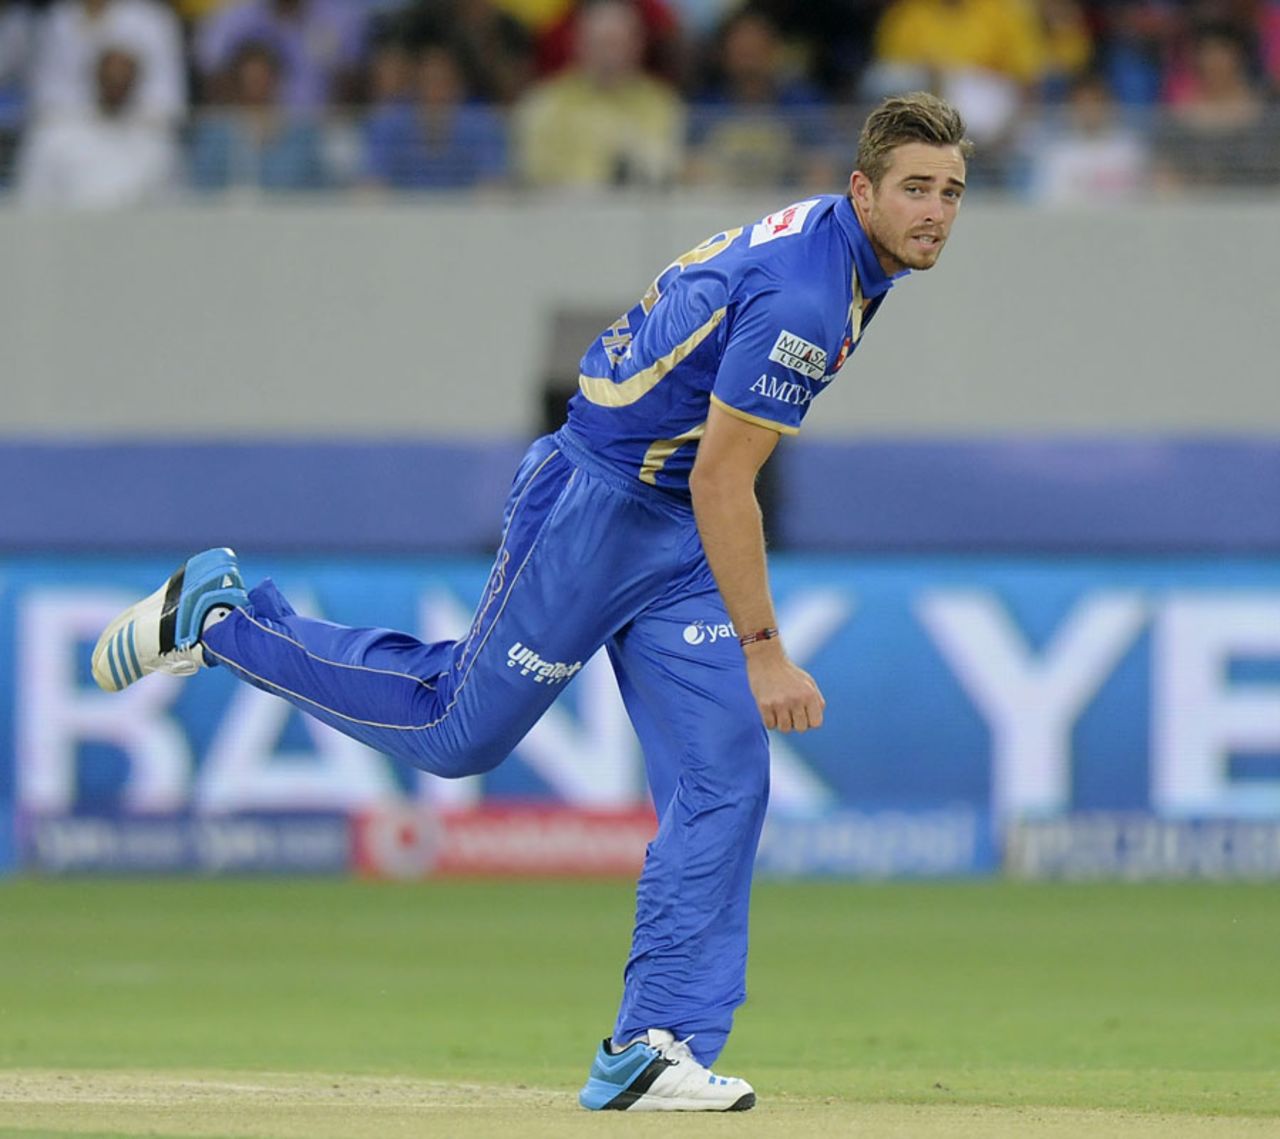 Tim Southee took 0 for 27 in his first game of the season, Chennai Super Kings v Rajasthan Royals, IPL 2014, Dubai, April 23, 2014